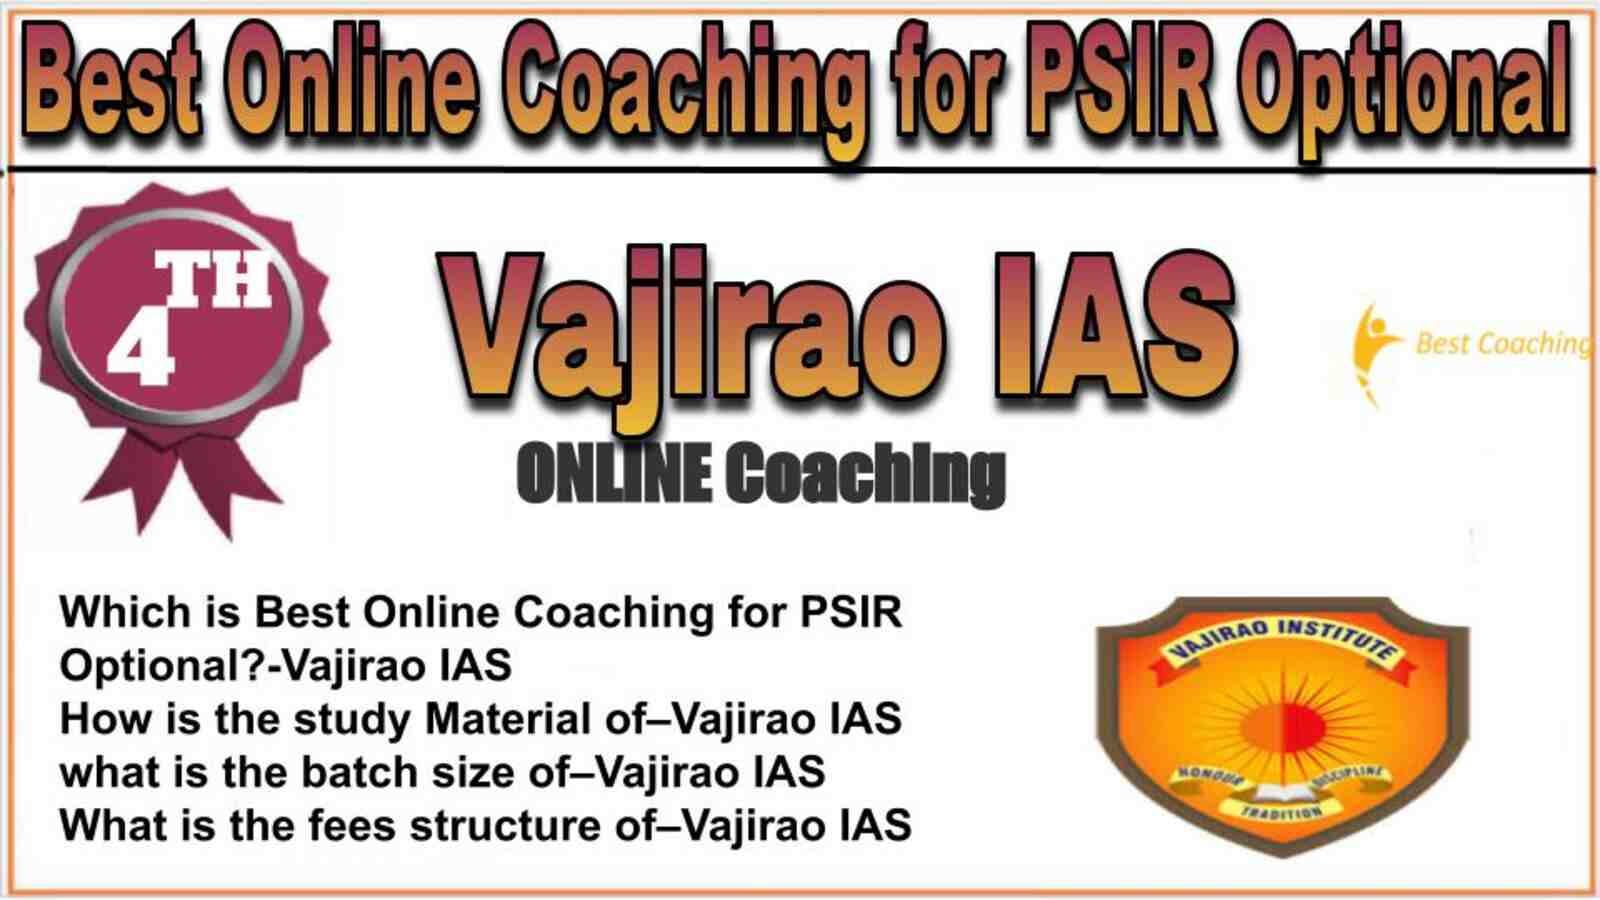 Rank 4 best online coaching for PSIR Optional